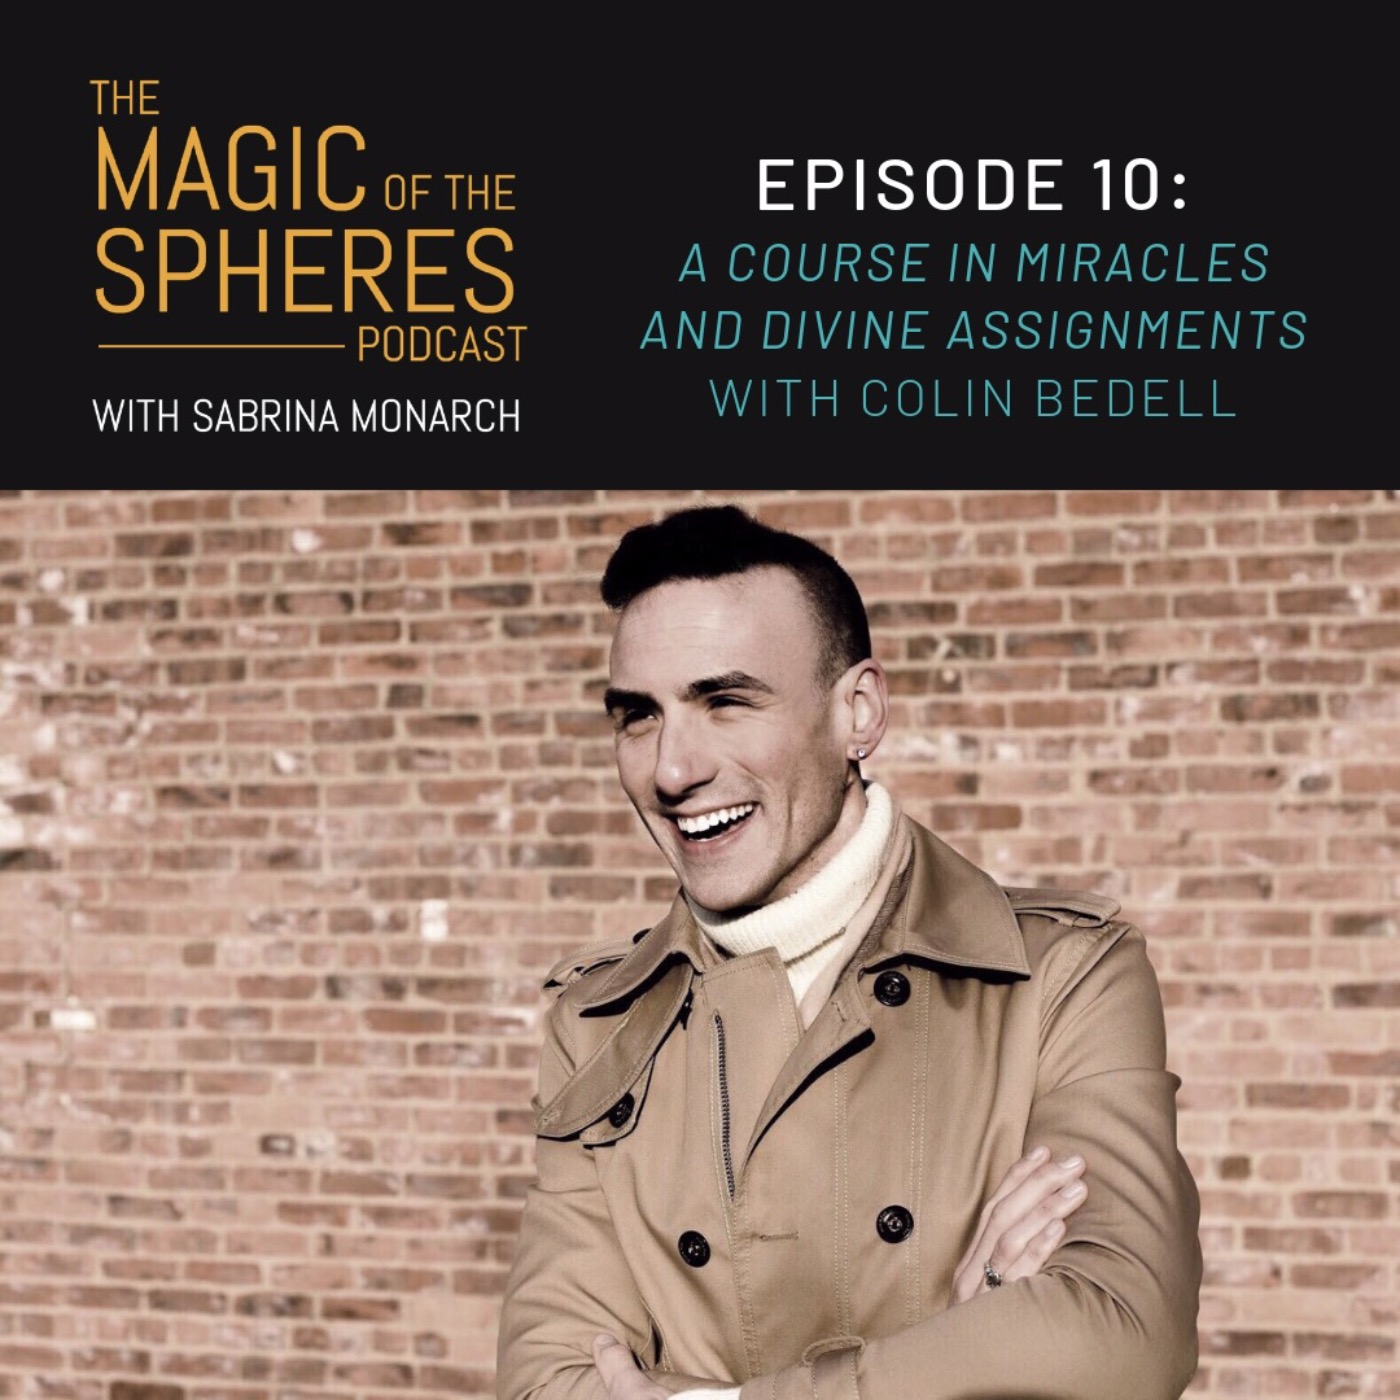 A Course in Miracles & Divine Assignments with Colin Bedell